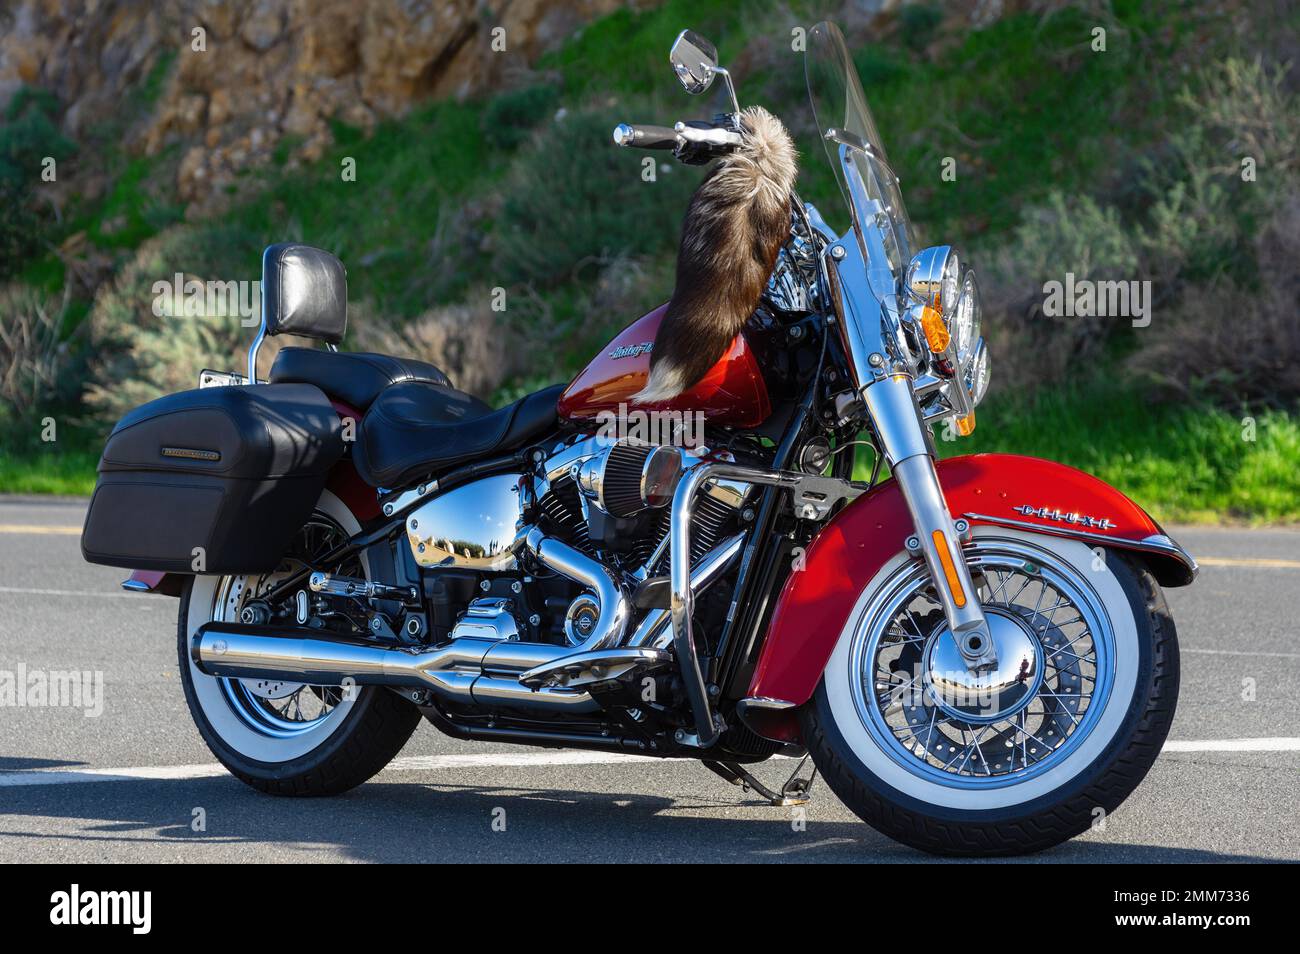 Palos Verdes Peninsula, California, United States - January 28, 2023: classic large motorcycle shown parked by a roadside. Stock Photo